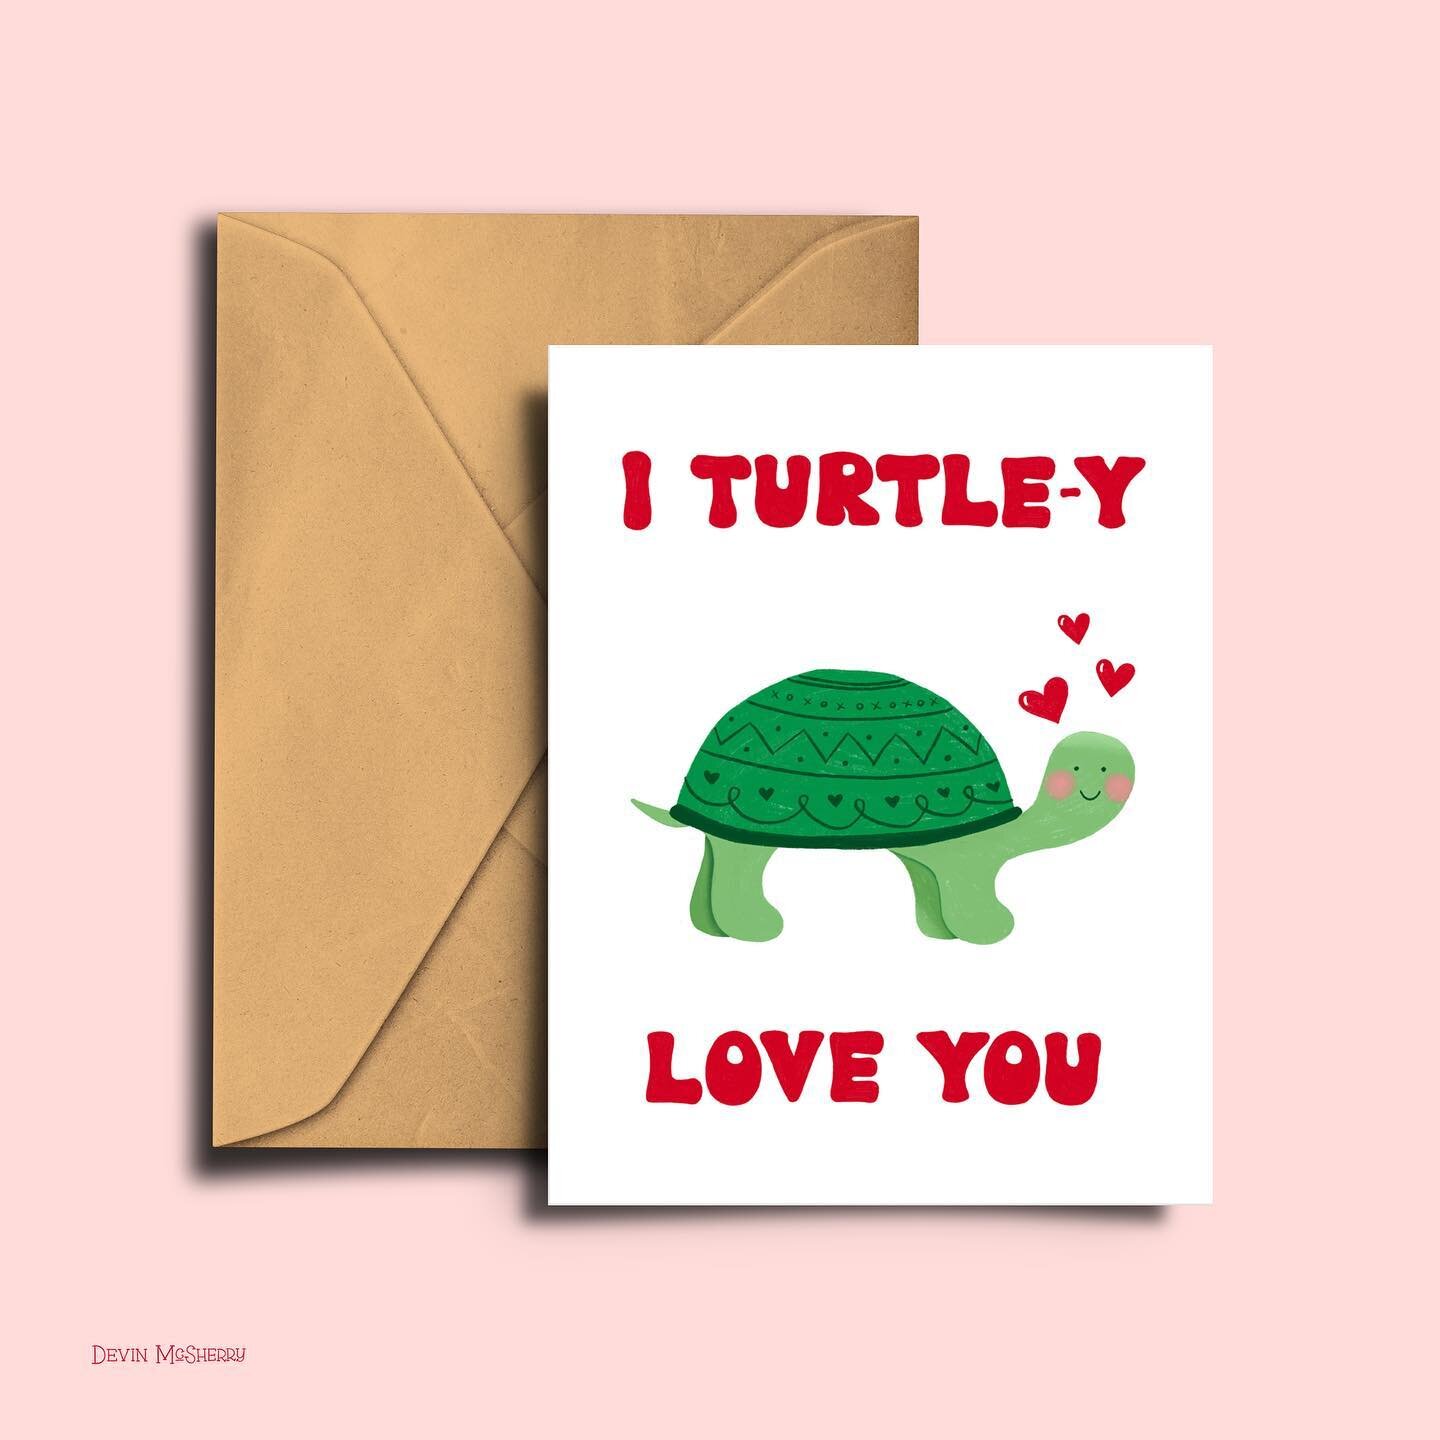 Valentine&rsquo;s Day is just around the corner! Who would you turtle-y send this card to? ❤️🐢❤️
.
.
.
#valentines #valentine #artlicensing #greetingcarddesign #valentinedesign #brightartist #turtleyawesome #animalpuns #greetingcards #valentinesdayc